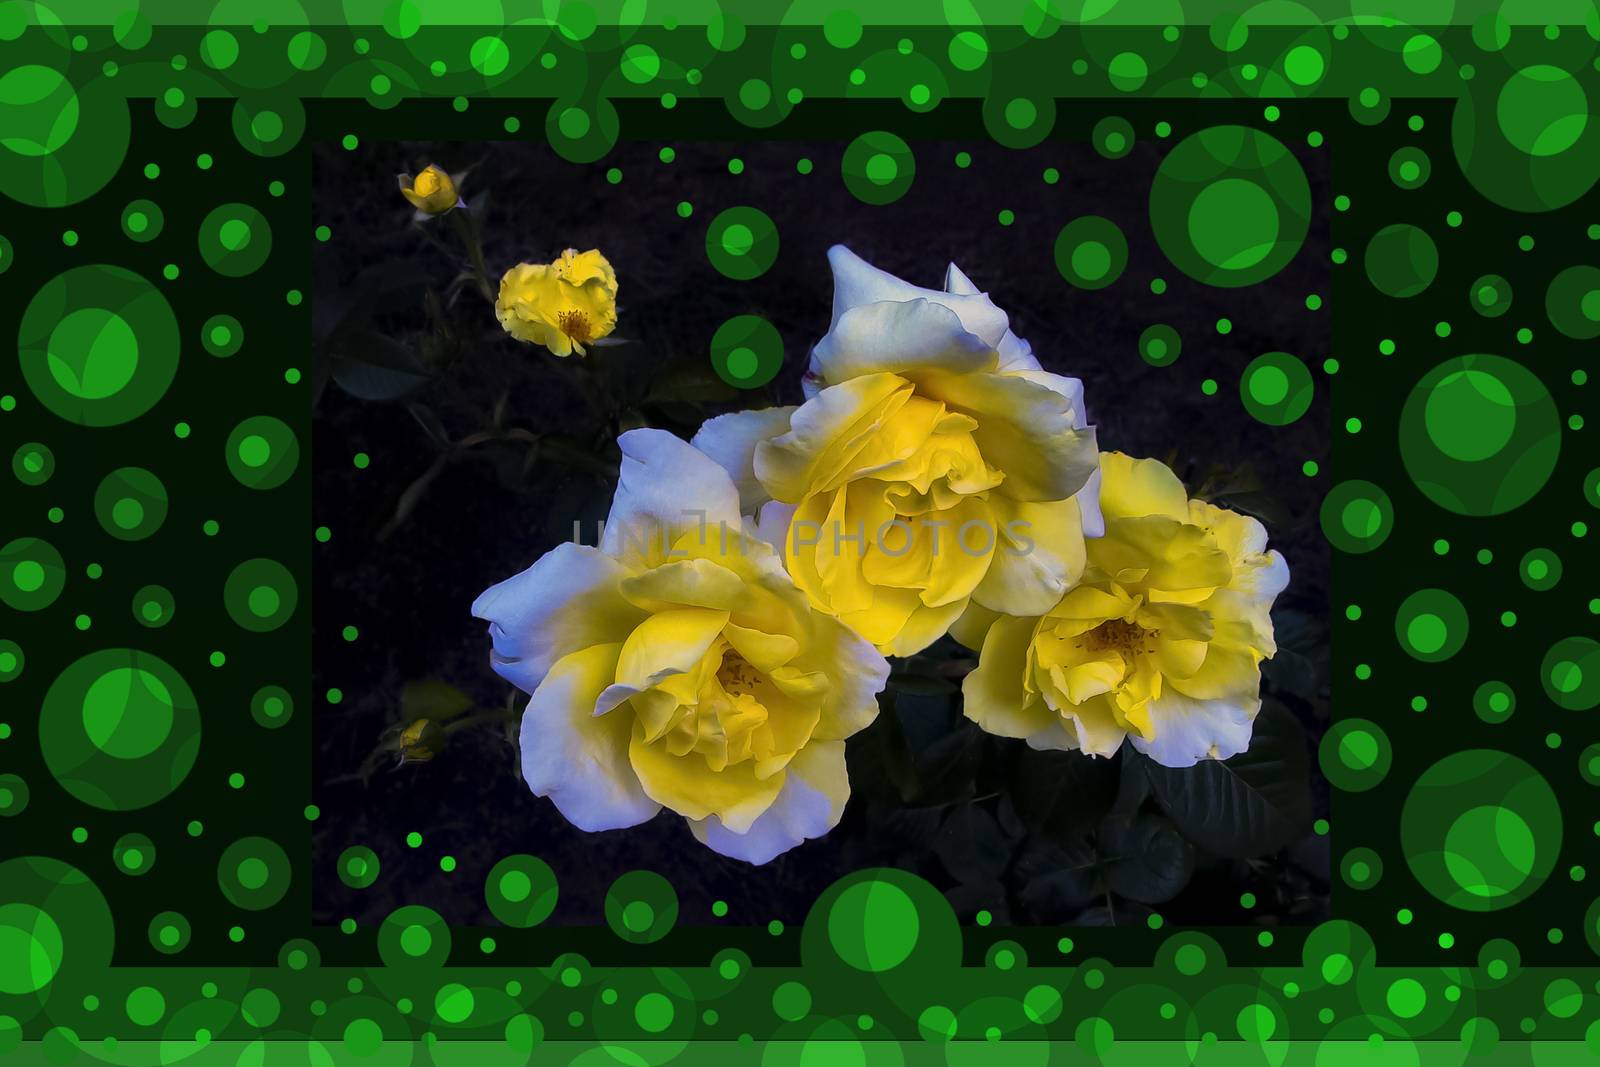 Textured green background with yellow - white colors by creativ000creativ